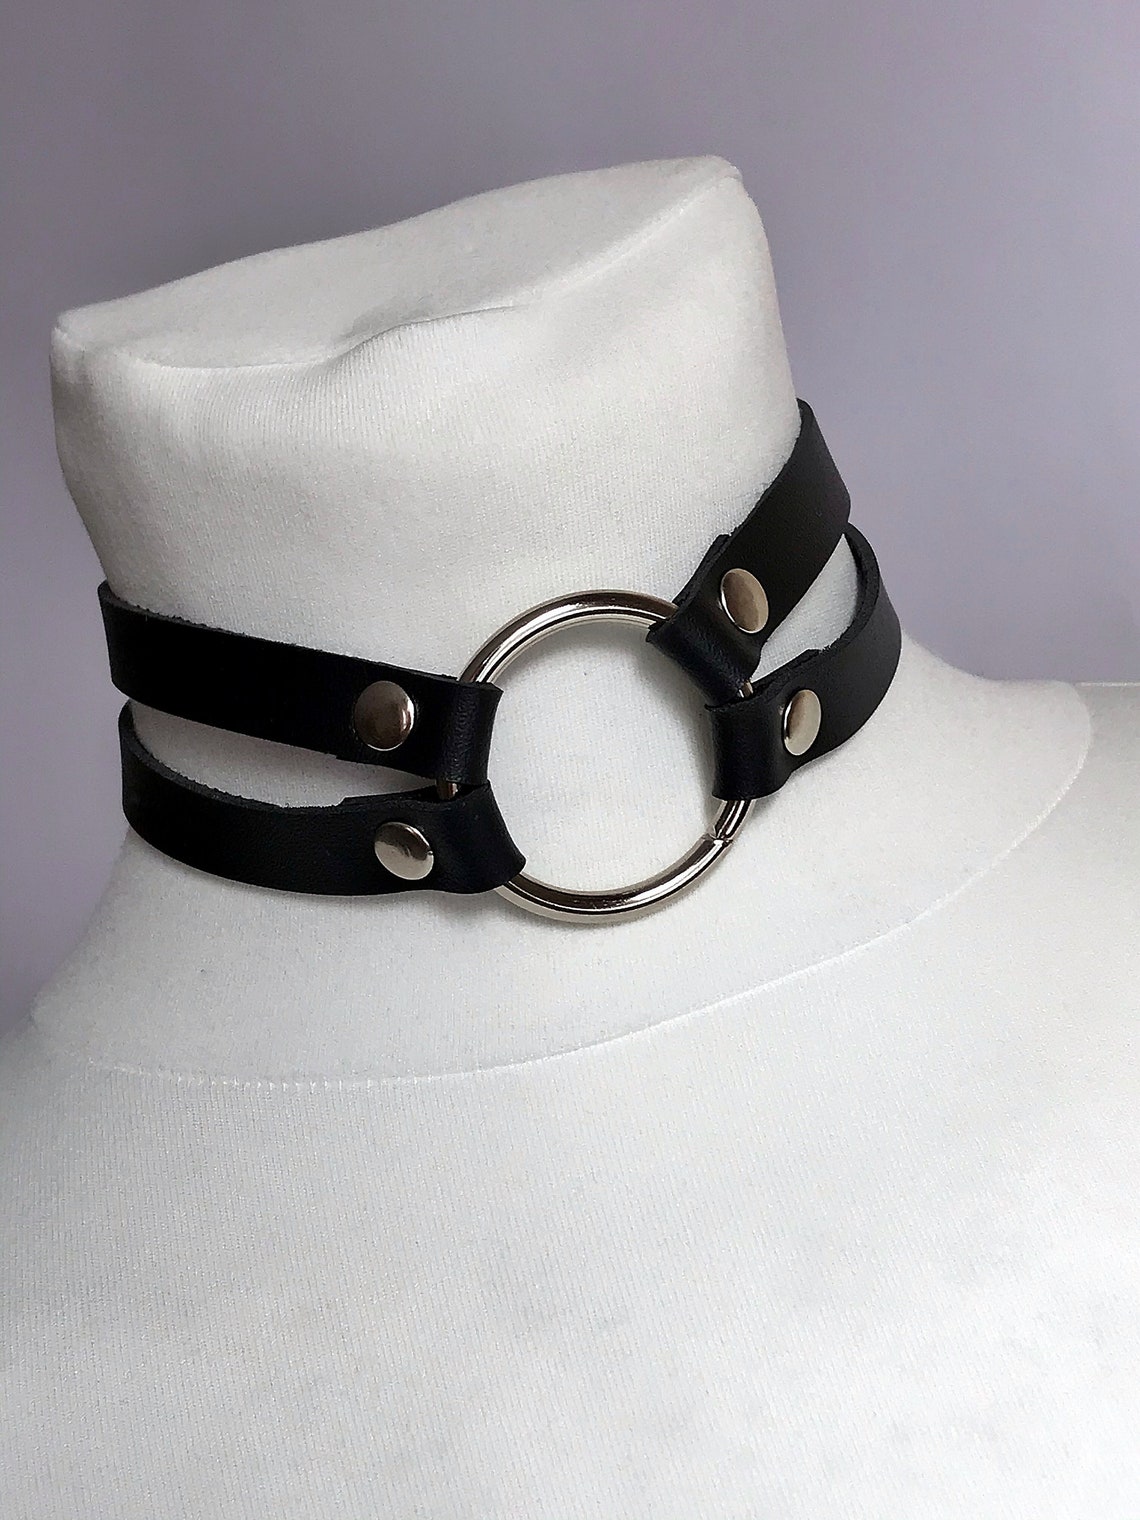 Choker with big o-ring leather choker collar with big | Etsy